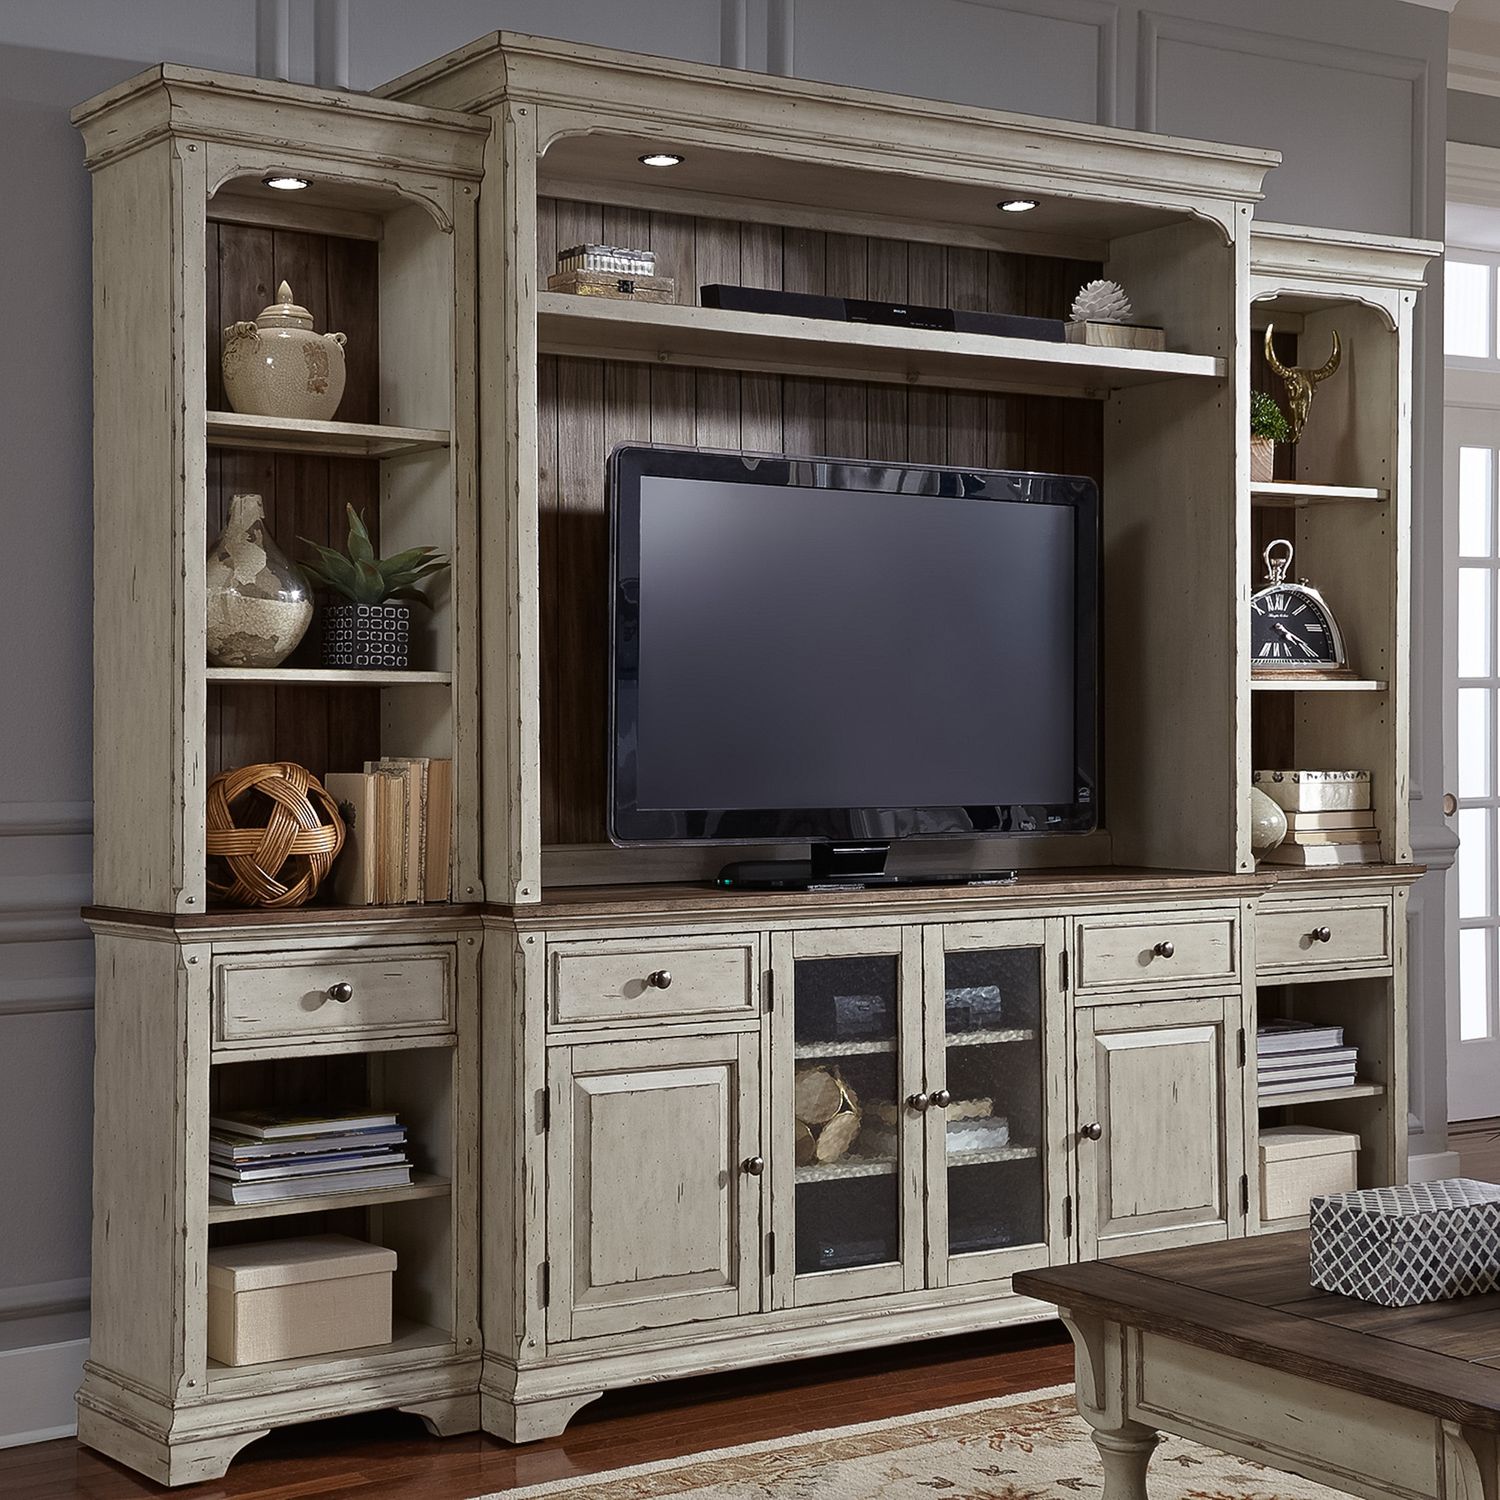 Morgan Creek / Entertainment Center with Piers SKU: 498-ENTW-ECP by Liberty Furniture